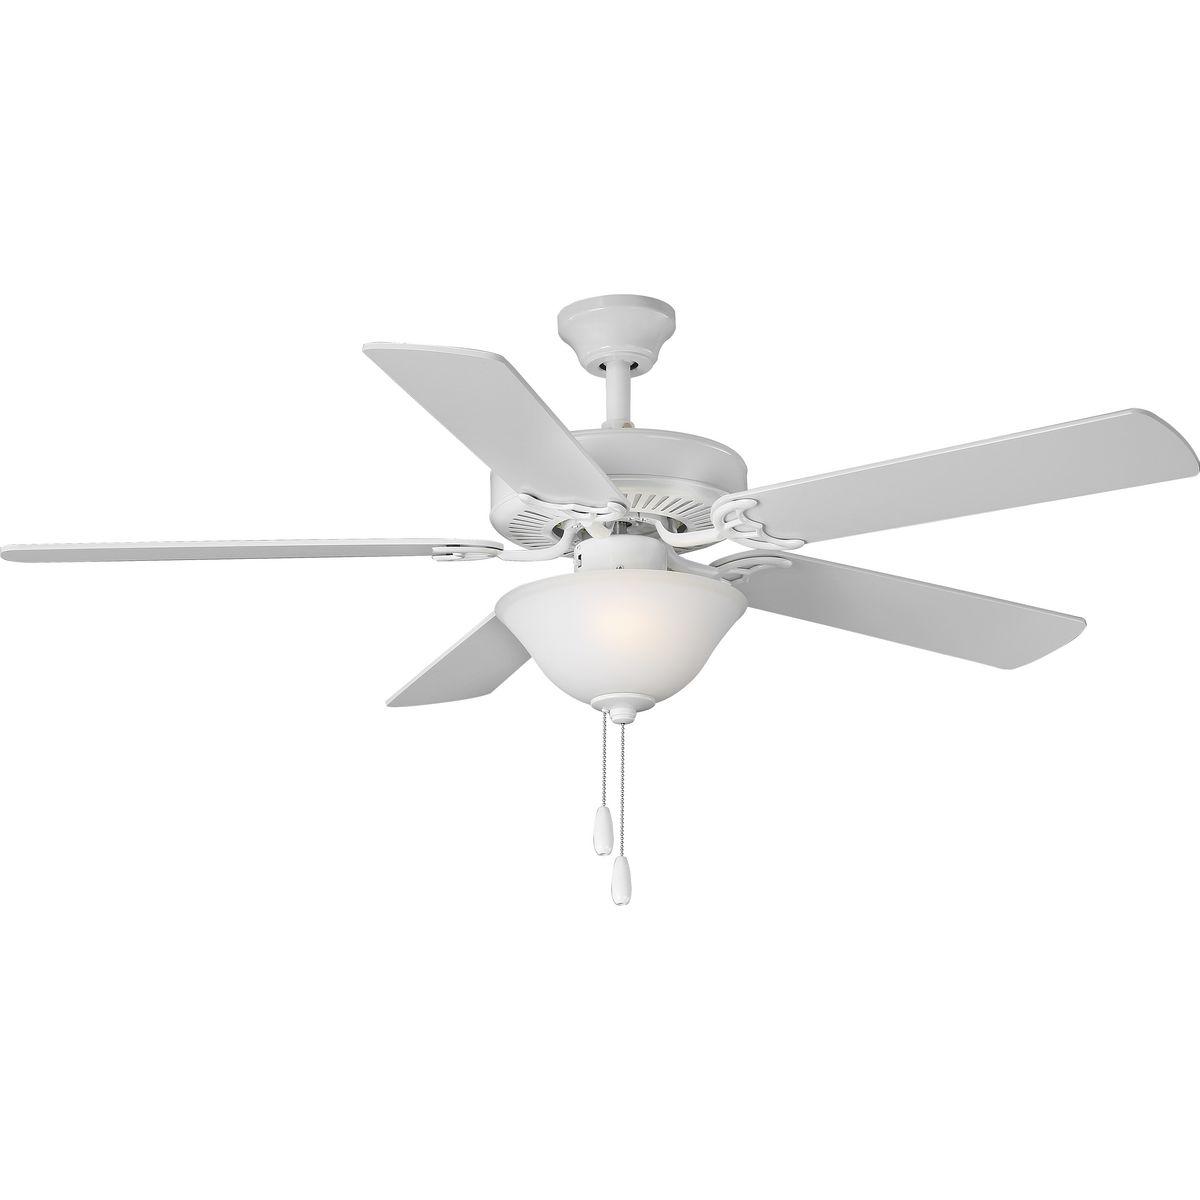 Hubbell P2599-30 A 52 in two-light, five-blade fan with reversible blades and a beautifully crafted white etched glass bowl. Powerful AirPro motor features 3-speed control that can also be reversed to provide year-round comfort. Two medium-based LED lamps are included (no